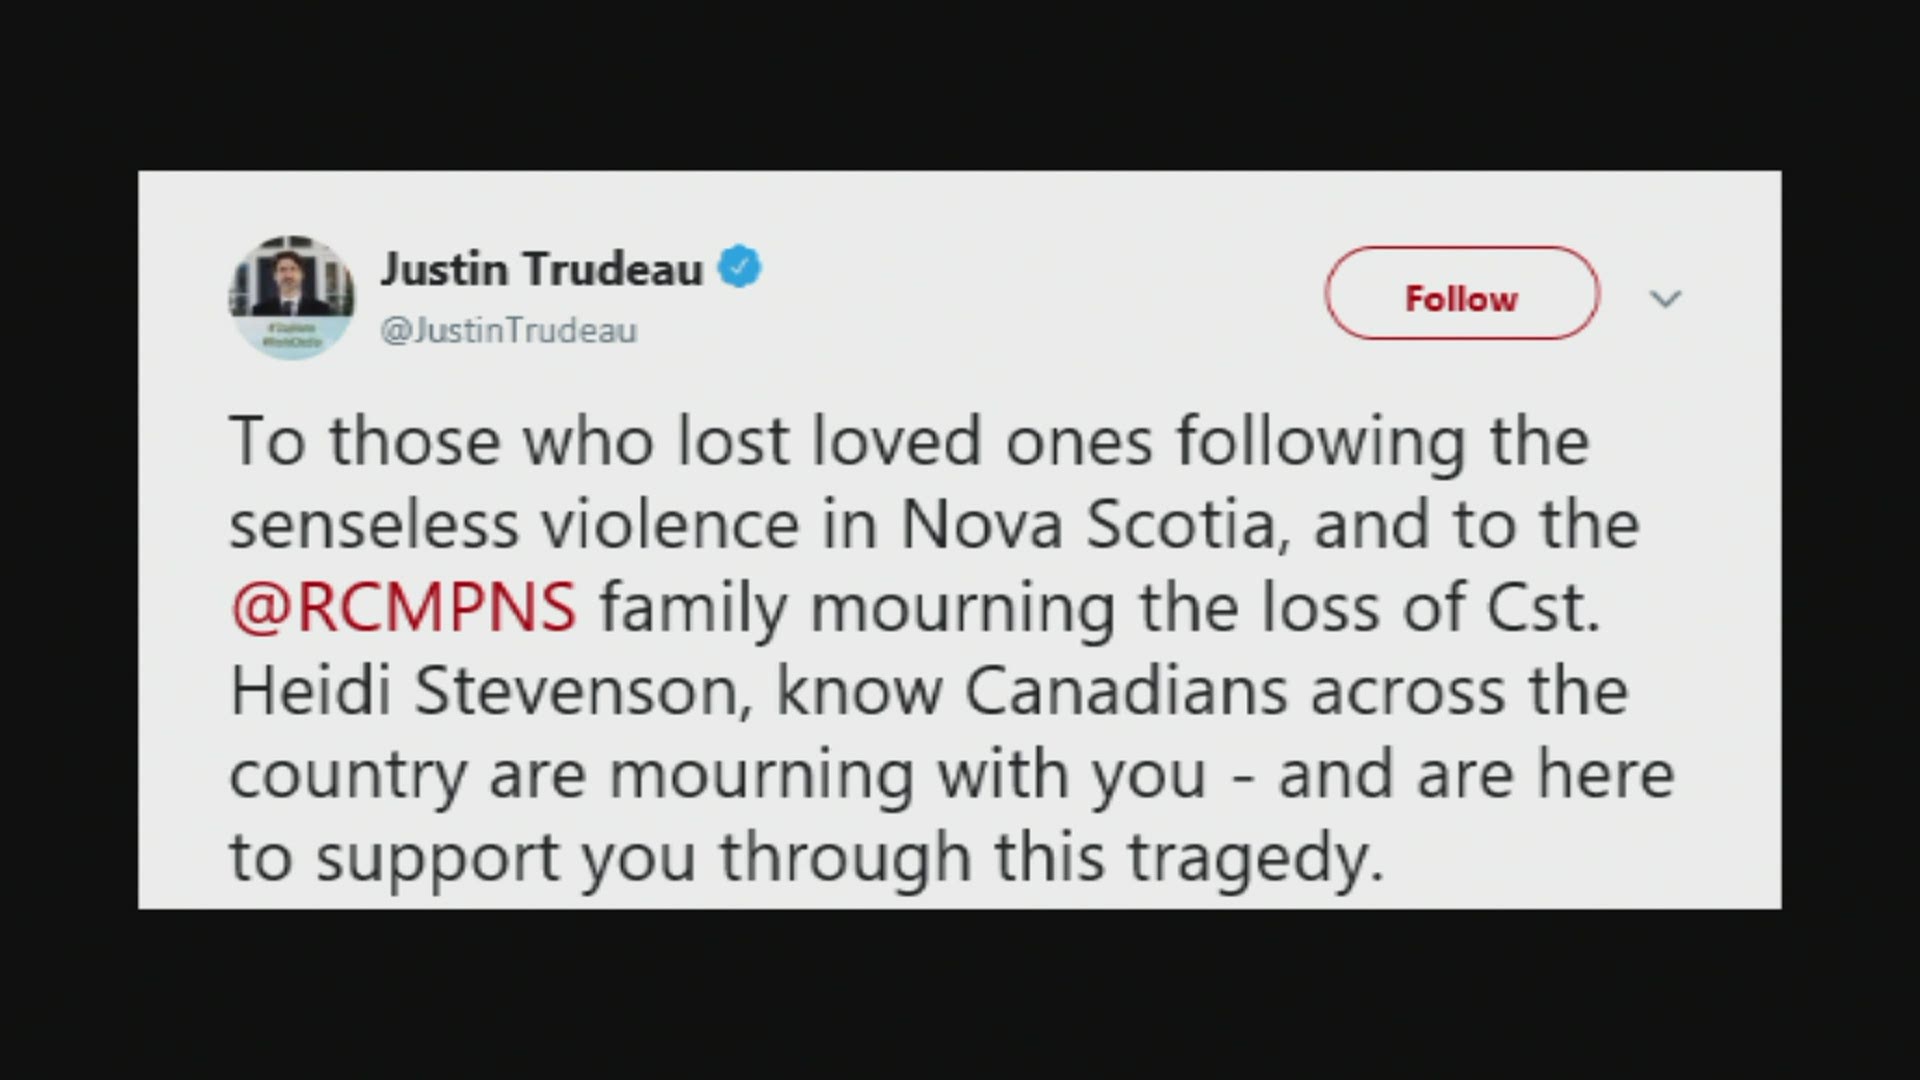 Canadian Prime Minister Justin Trudeau tweeted that the attack was "senseless", saying "Canadians across the country are mourning" with those who lost loved ones.